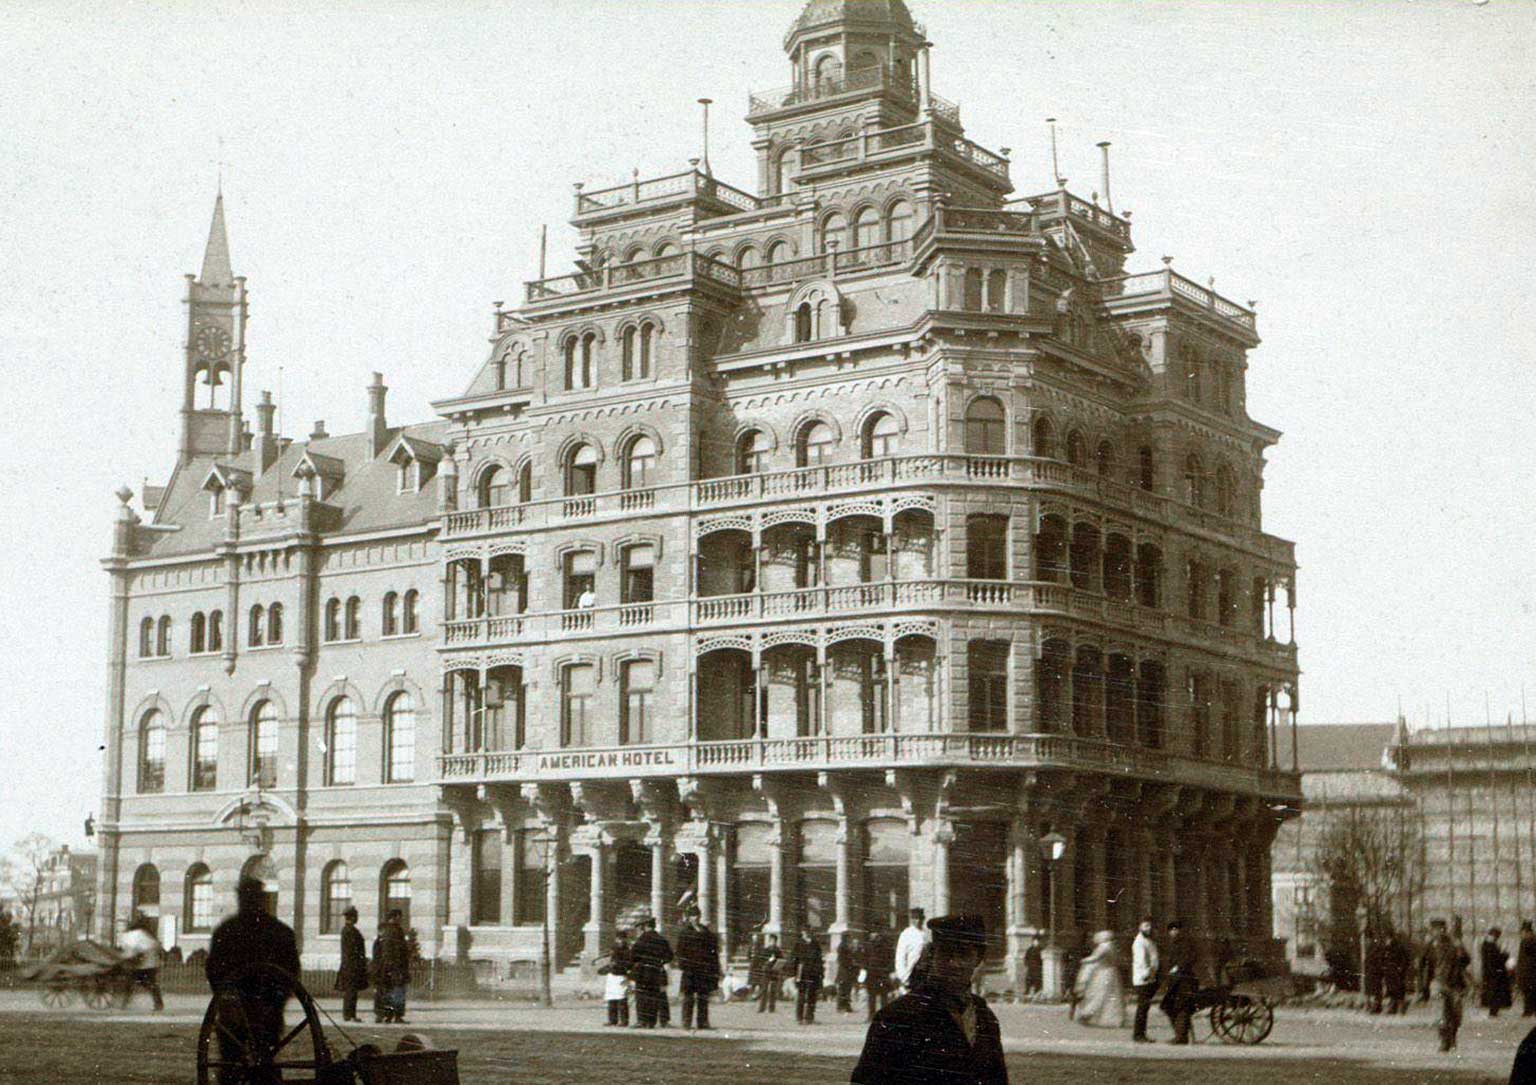 Leidseplein, Amsterdam, between 1882 and 1888, with first American Hotel